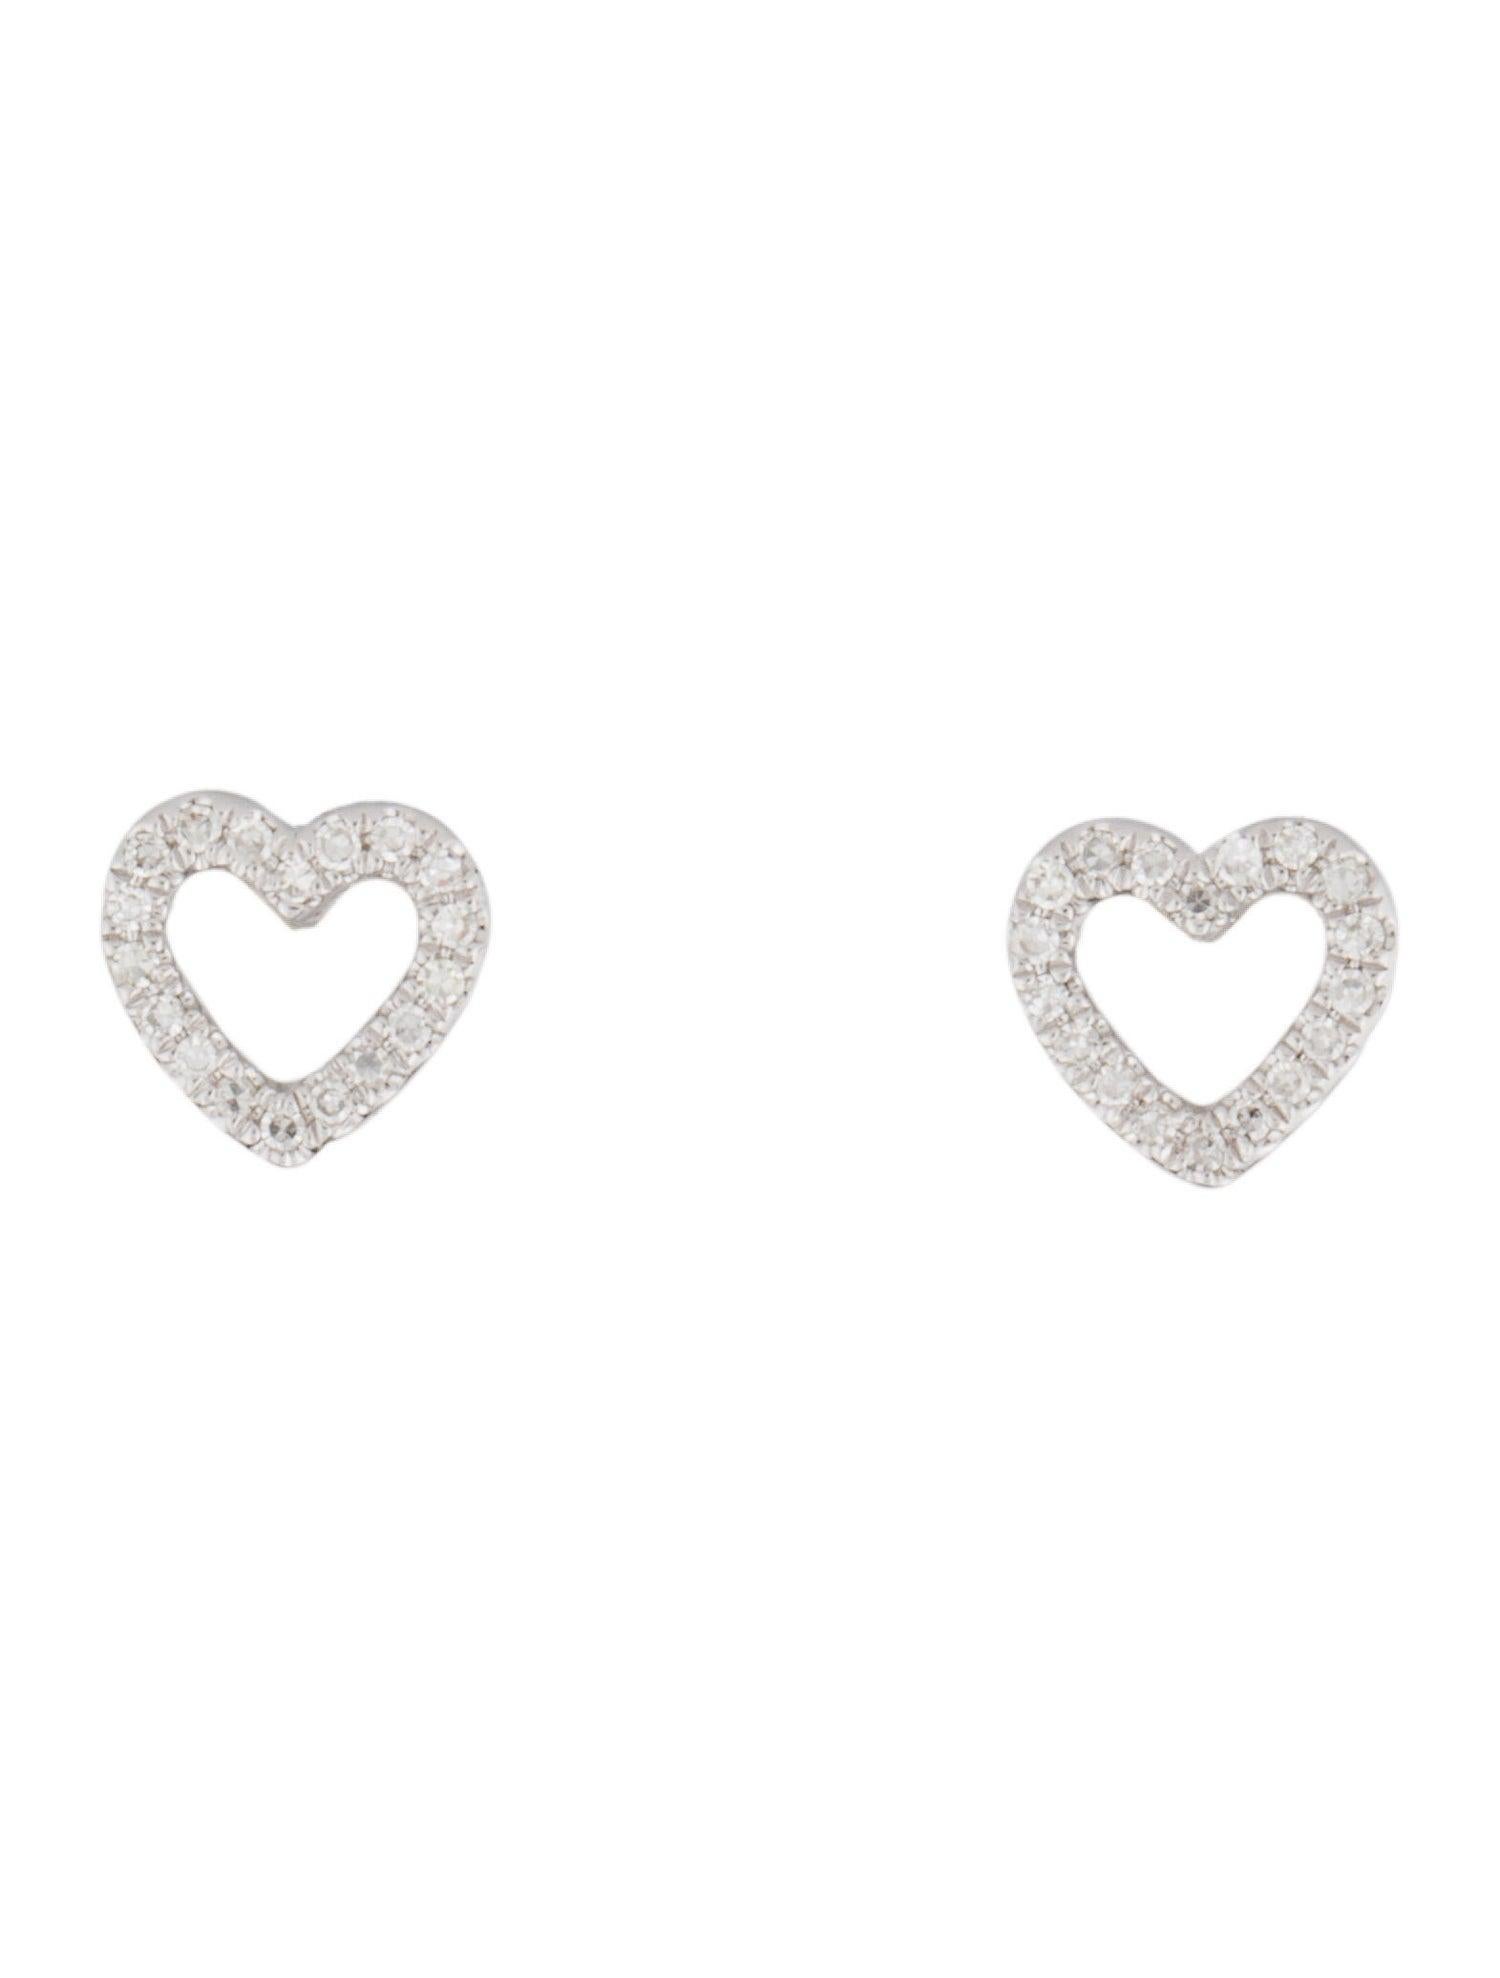 14 Karat White Gold 0.10 Carat Diamond Open Heart Stud Earrings In New Condition For Sale In Great neck, NY